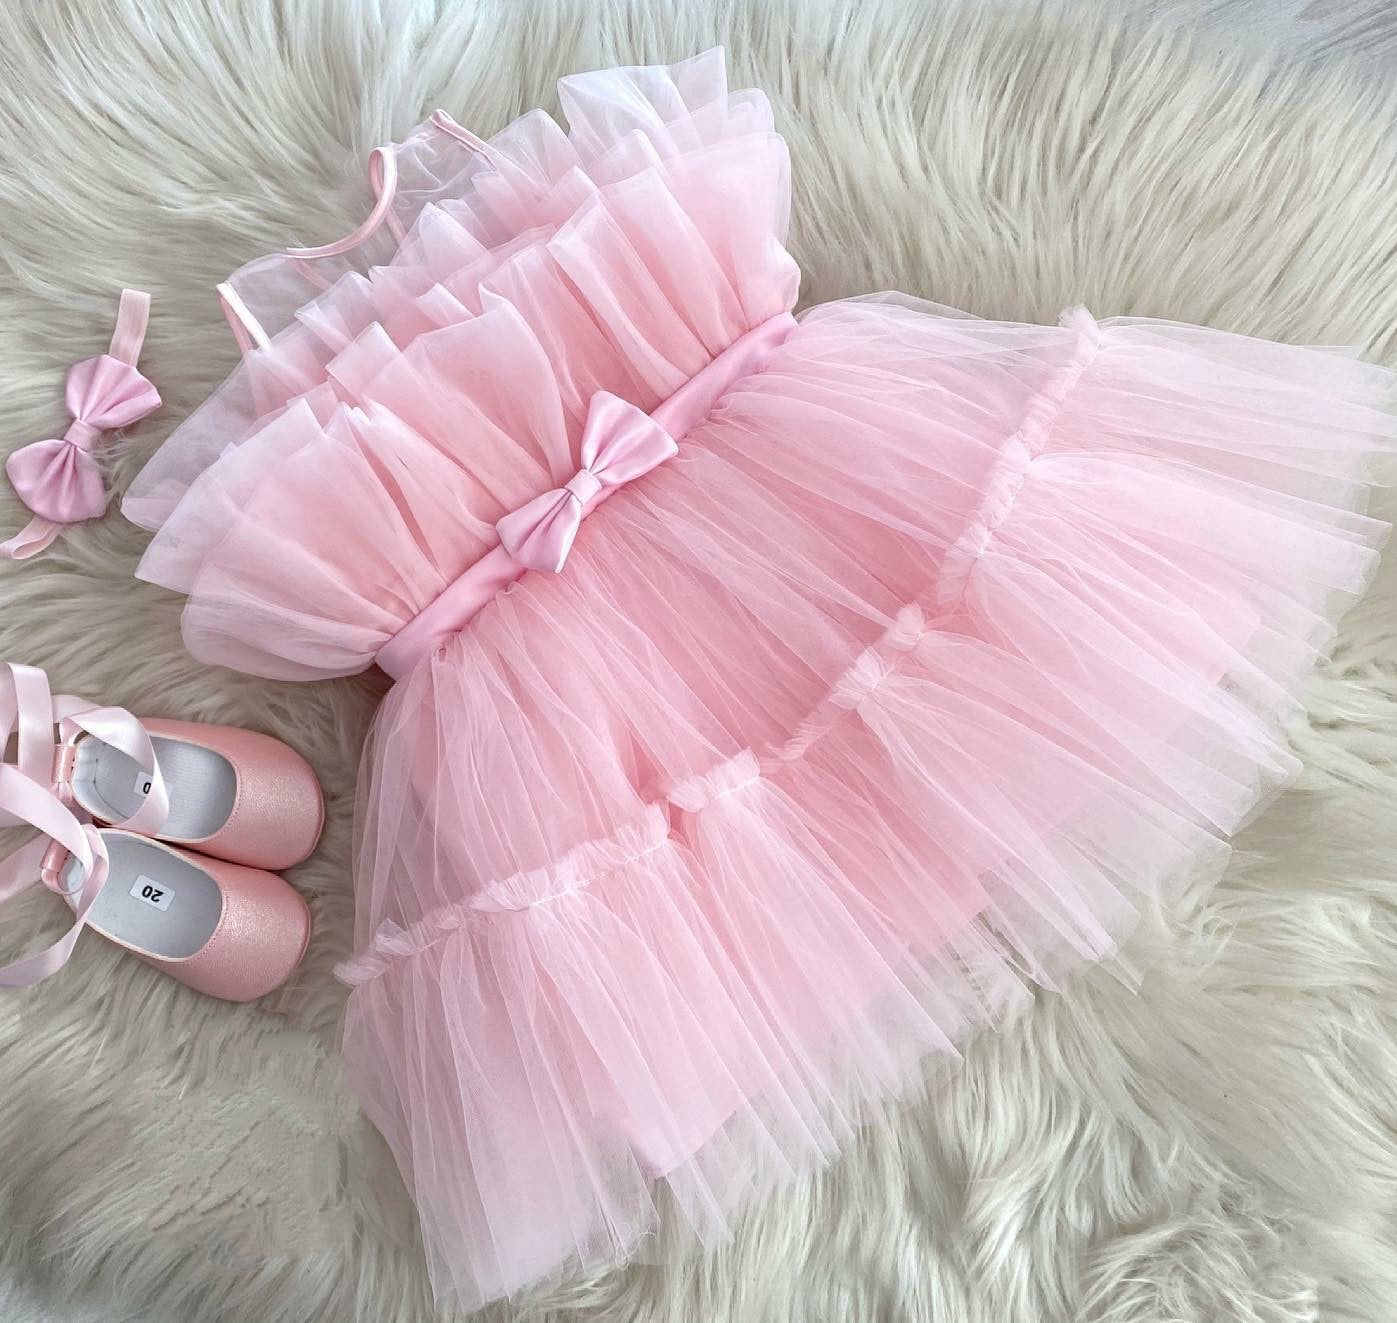 Gorgeous baby dress for birthday